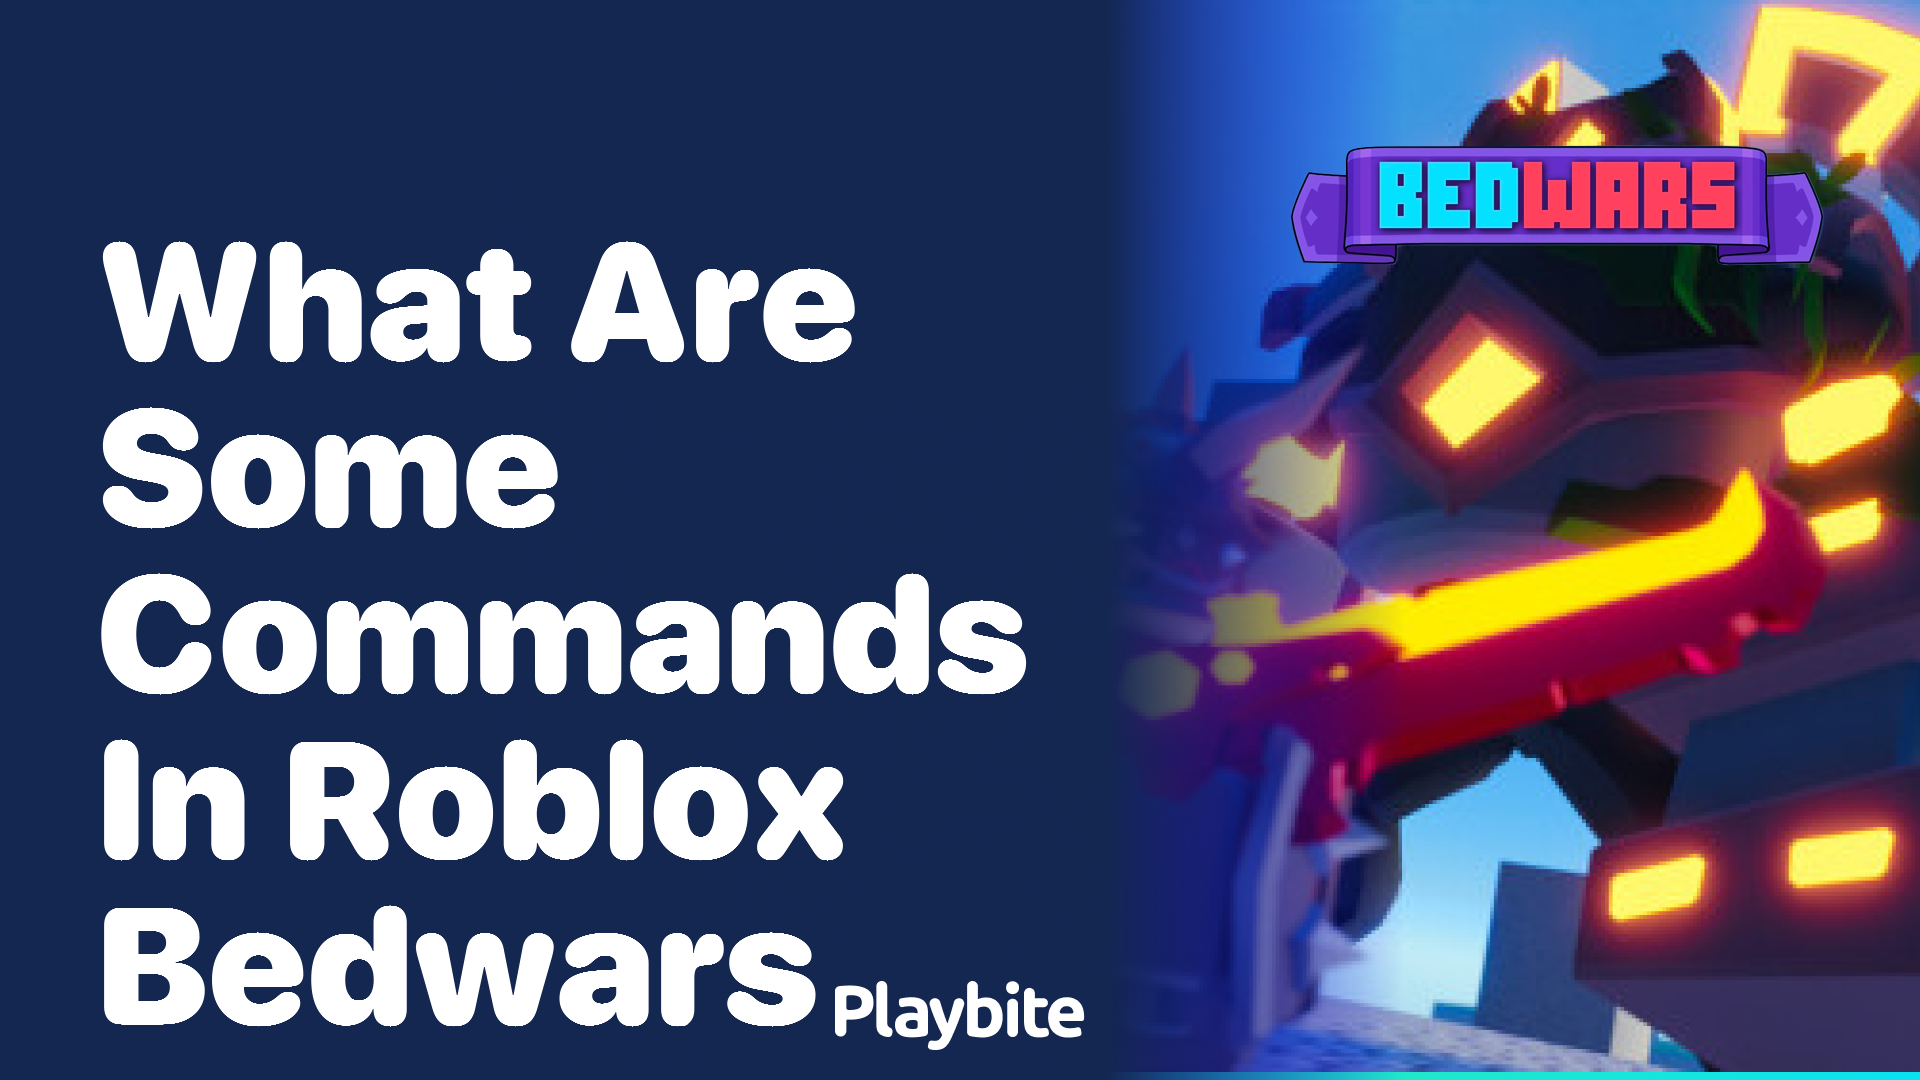 What Are Some Commands in Roblox Bedwars?